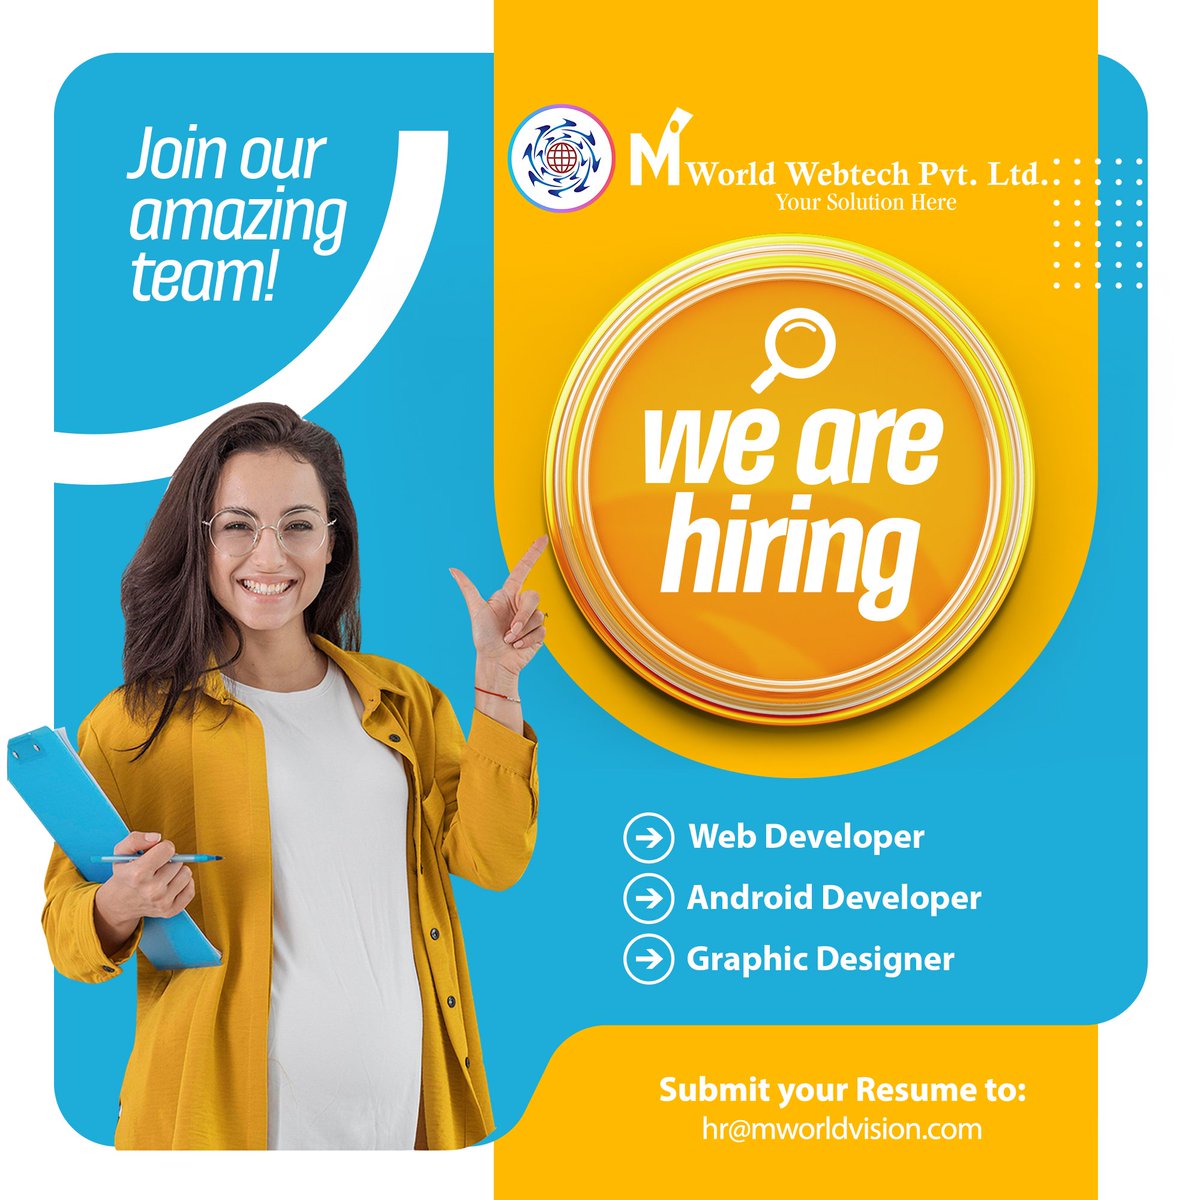 We are hiring
Web Developer
Android Developer
Graphics Designer
#webdeveloper #androiddeveloper #graphicdesigner 
#rajkot #hiring #fresher #fresherjobs #experience #job #vacancy